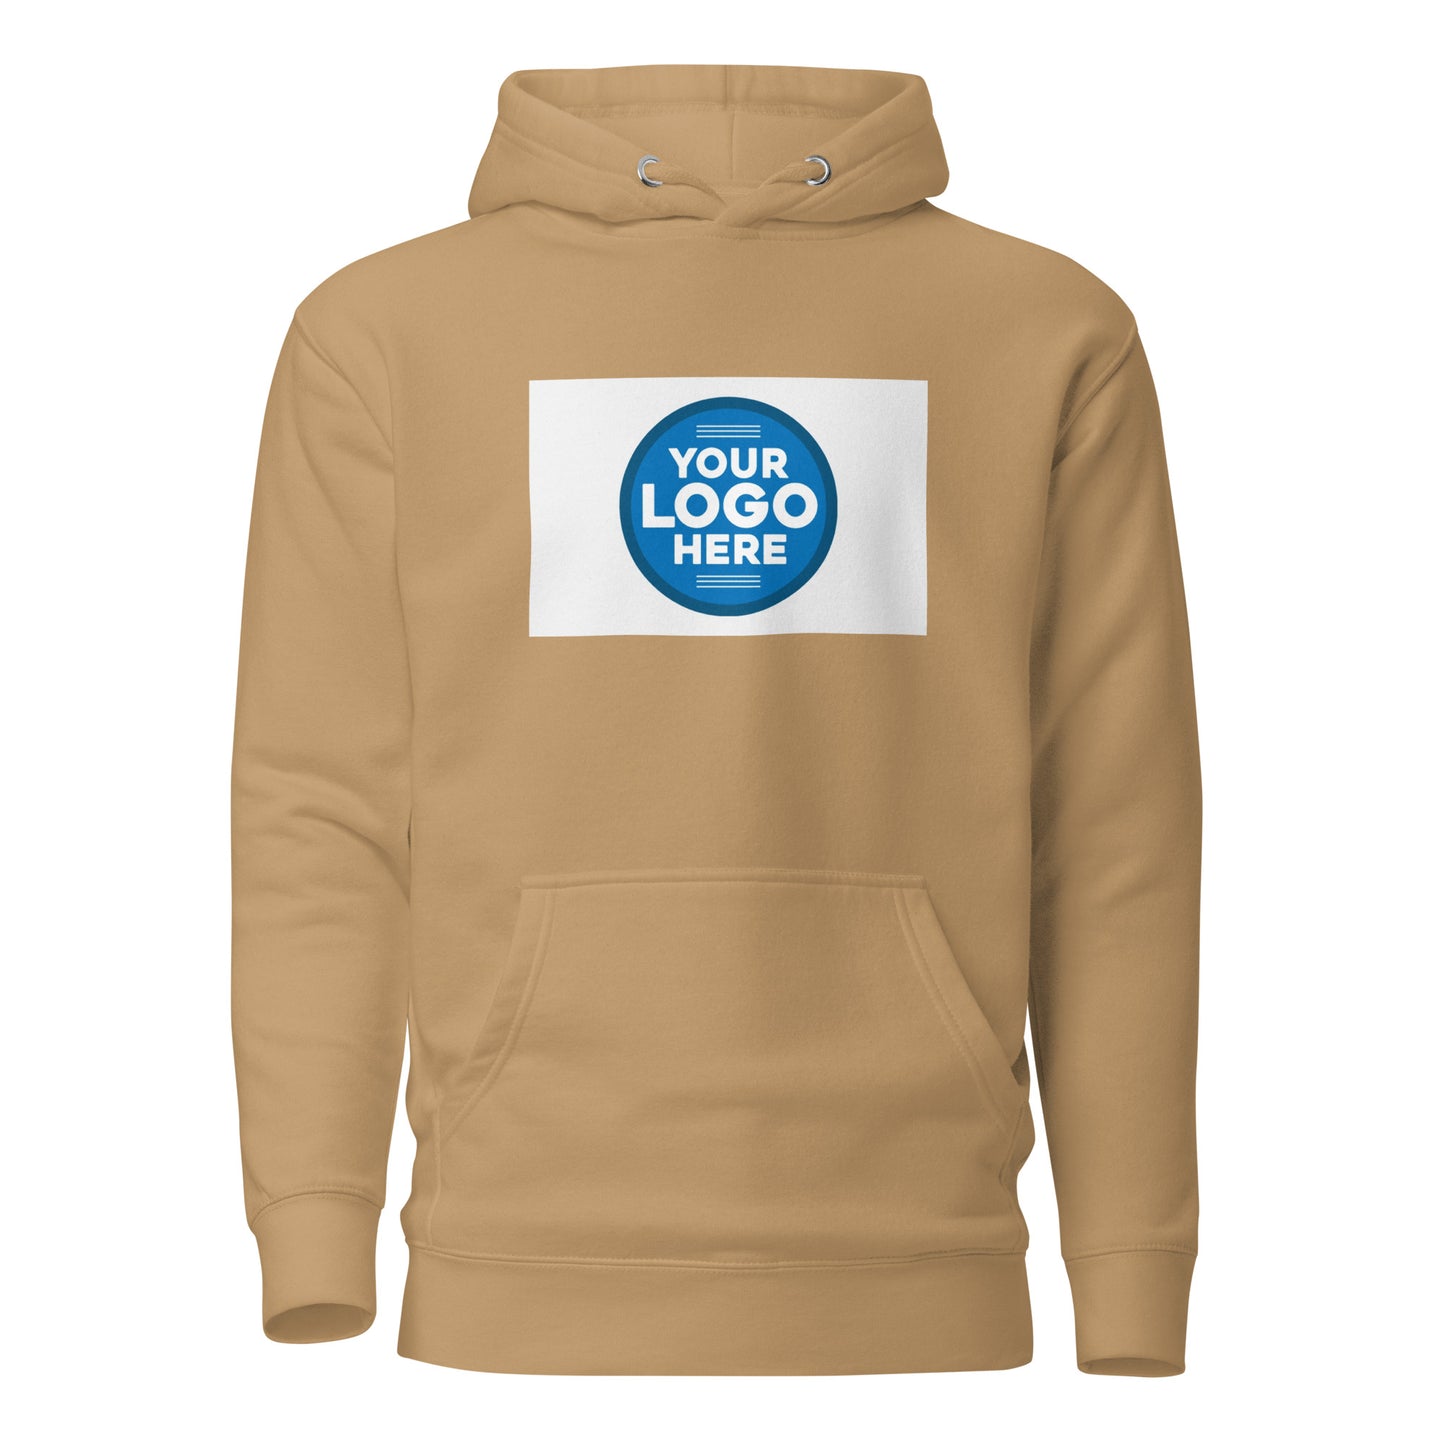 Create Your Own DTG - Centered logo - Unisex Hoodie